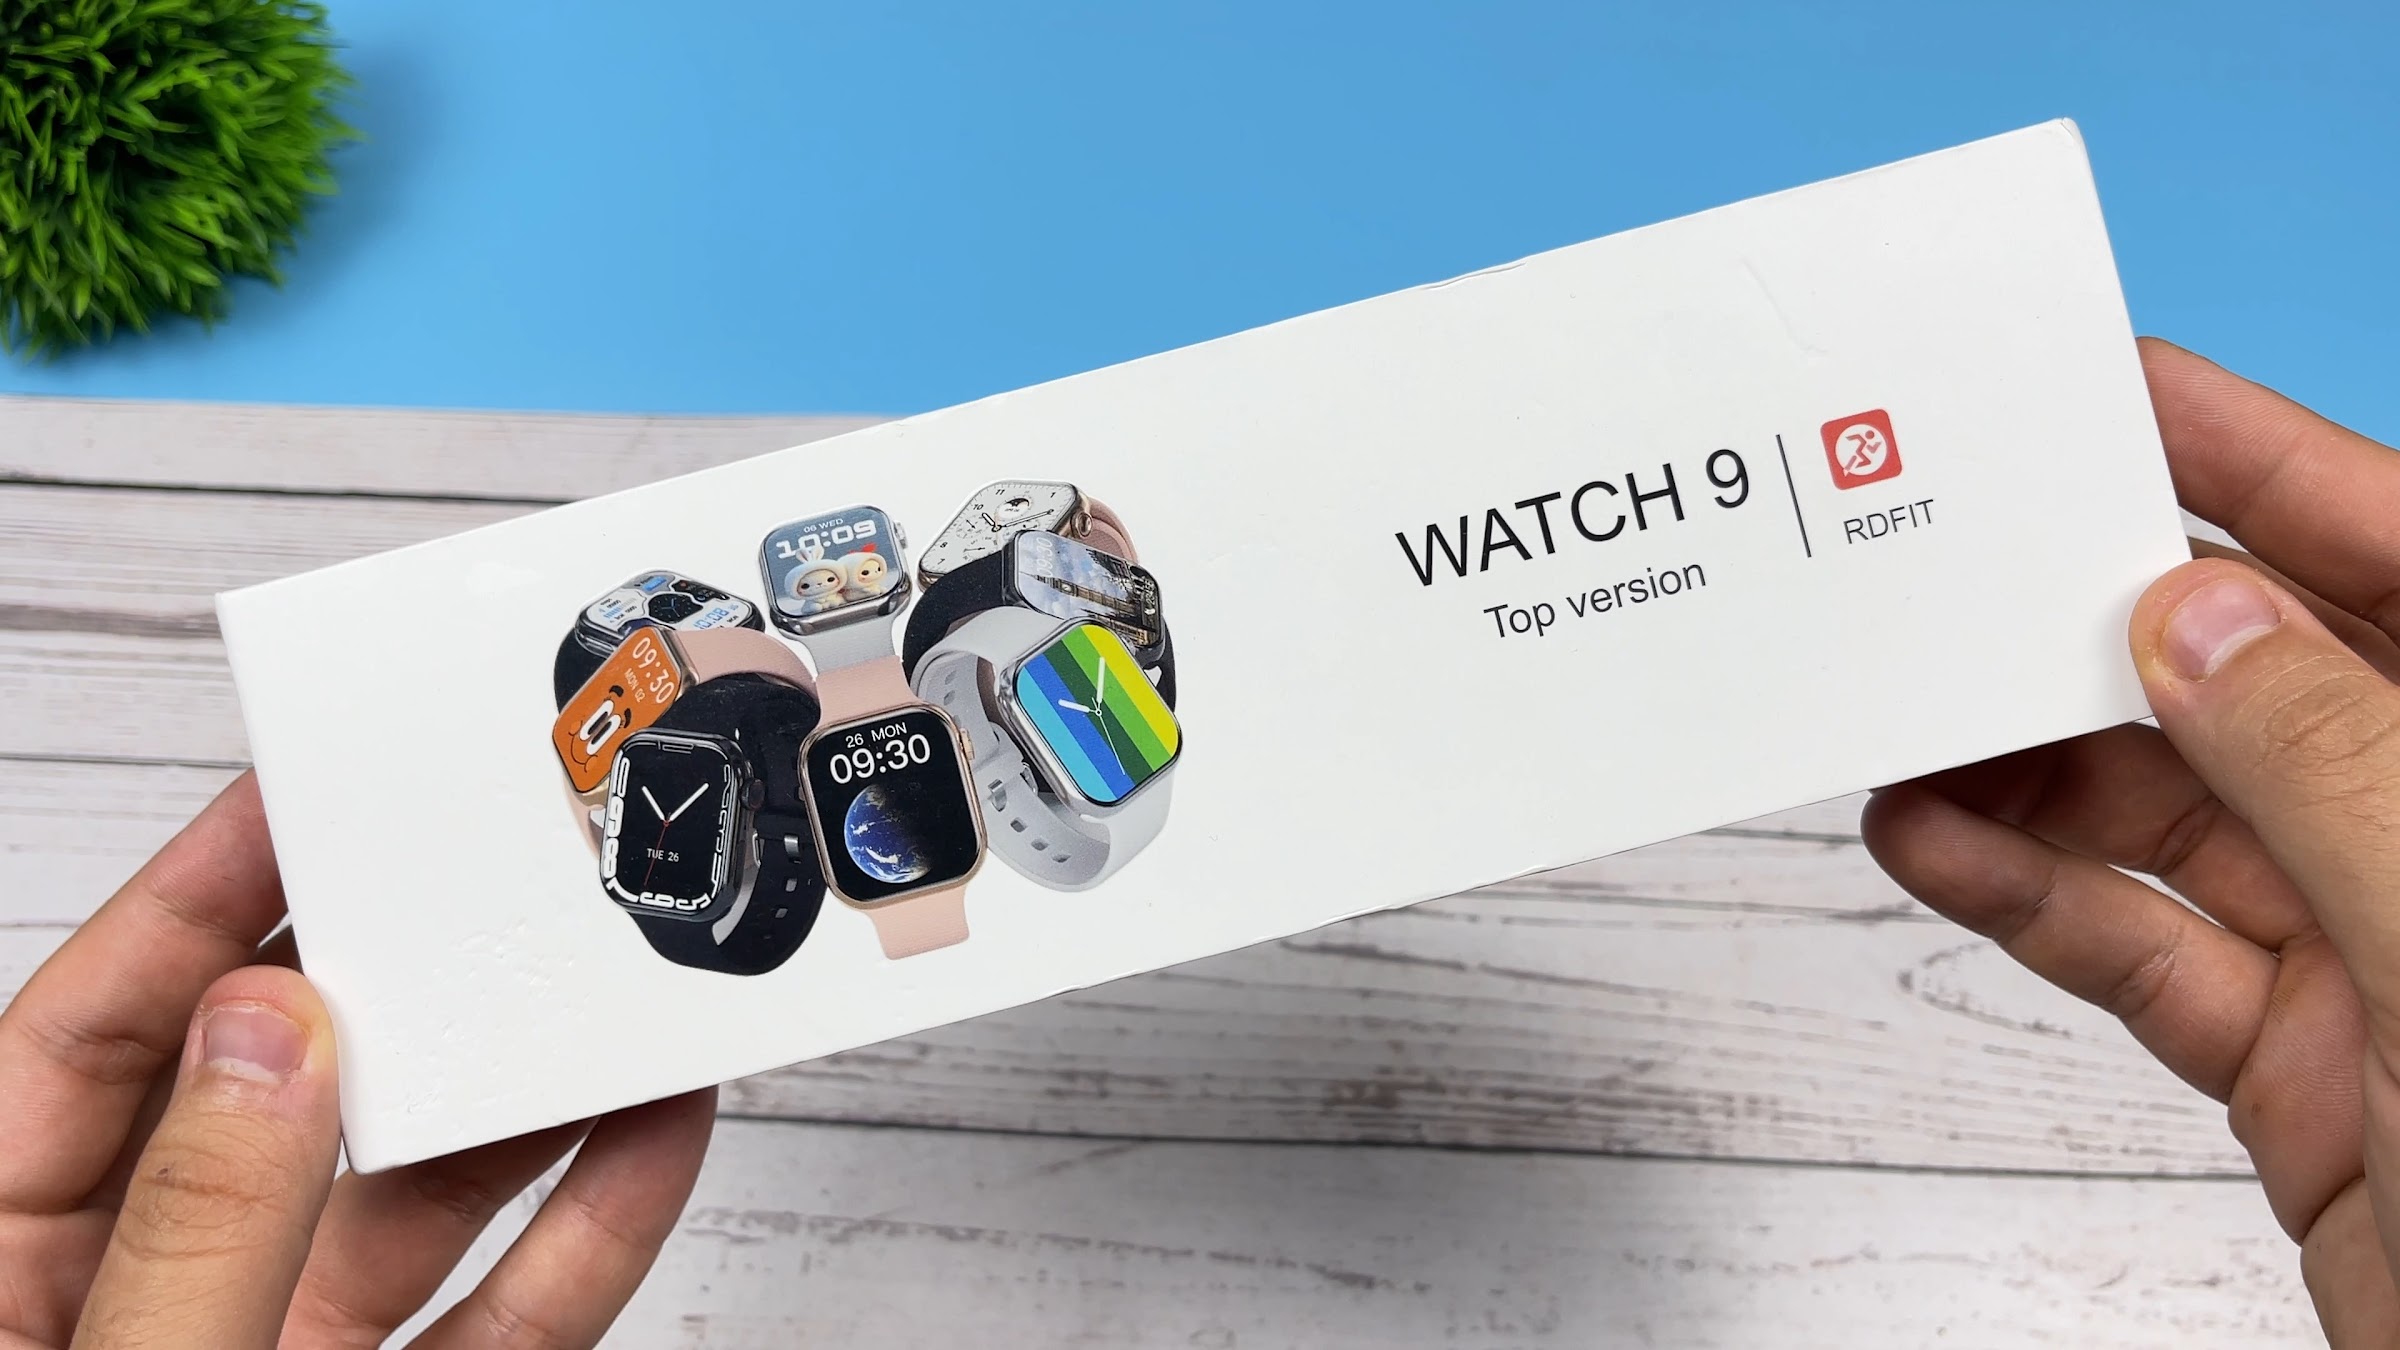 IW9 WATCH Review: A In-Depth Look at the Apple Watch Series 8 Replica with Dynamic Island & Budget Price